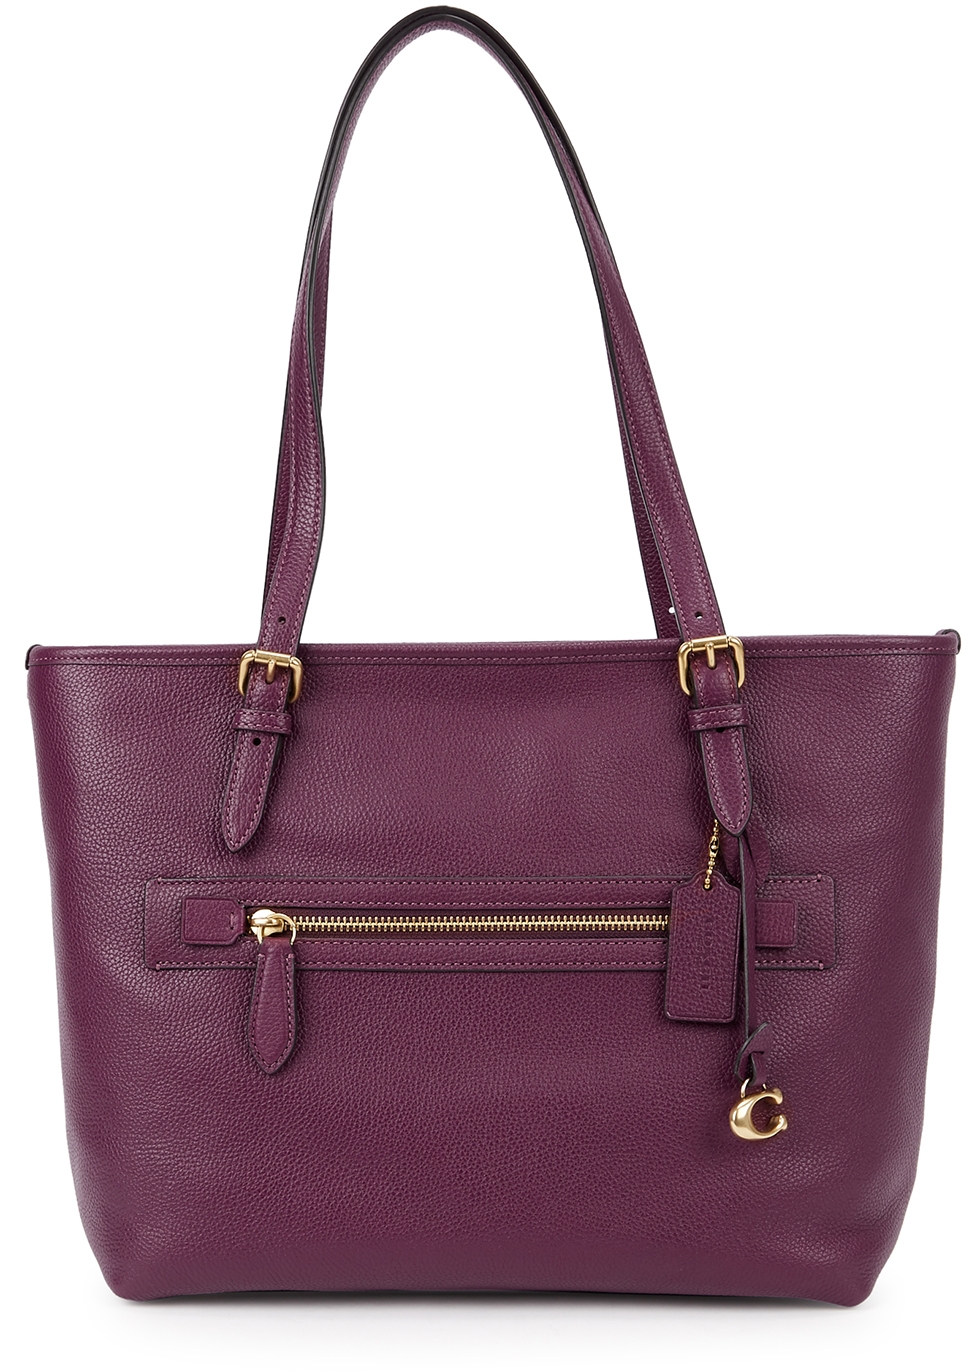 Taylor purple leather tote